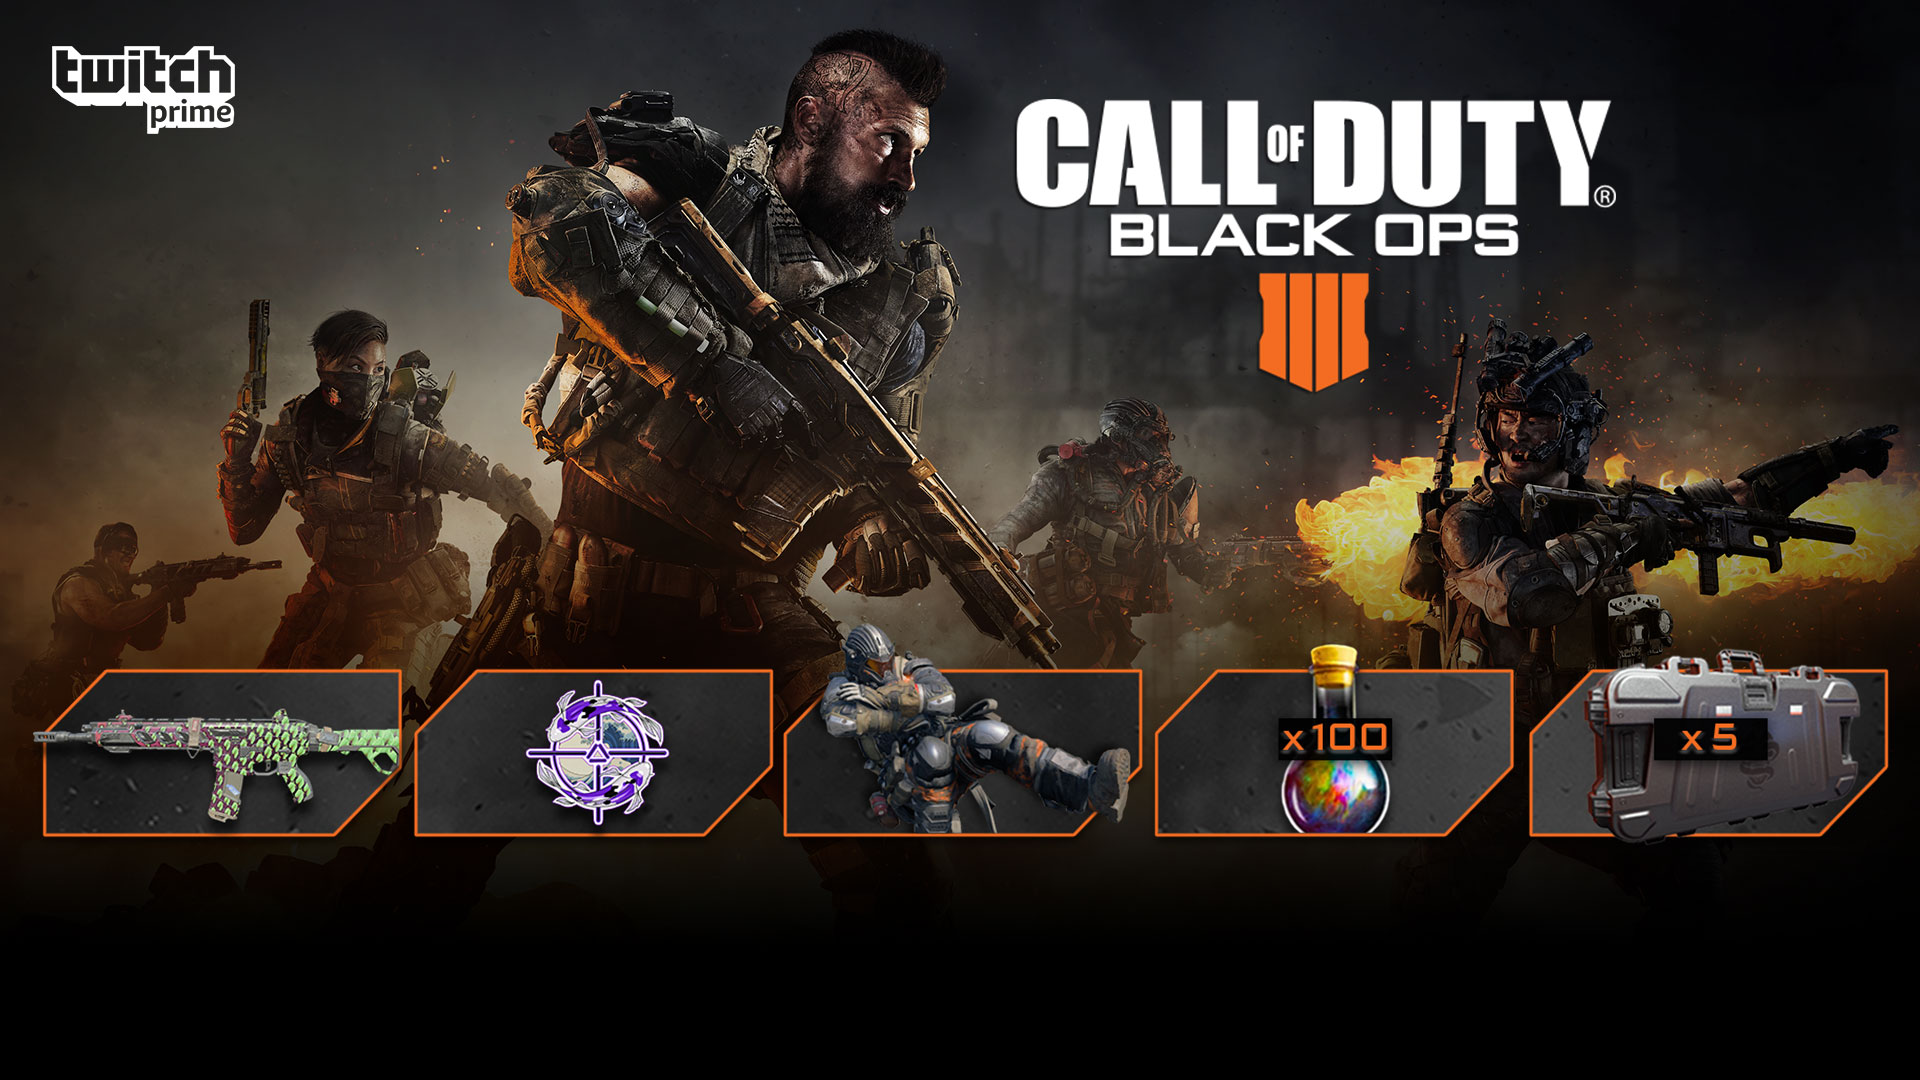 Grab some Goods: Twitch Prime Has a Free Call of Duty®: Black Ops